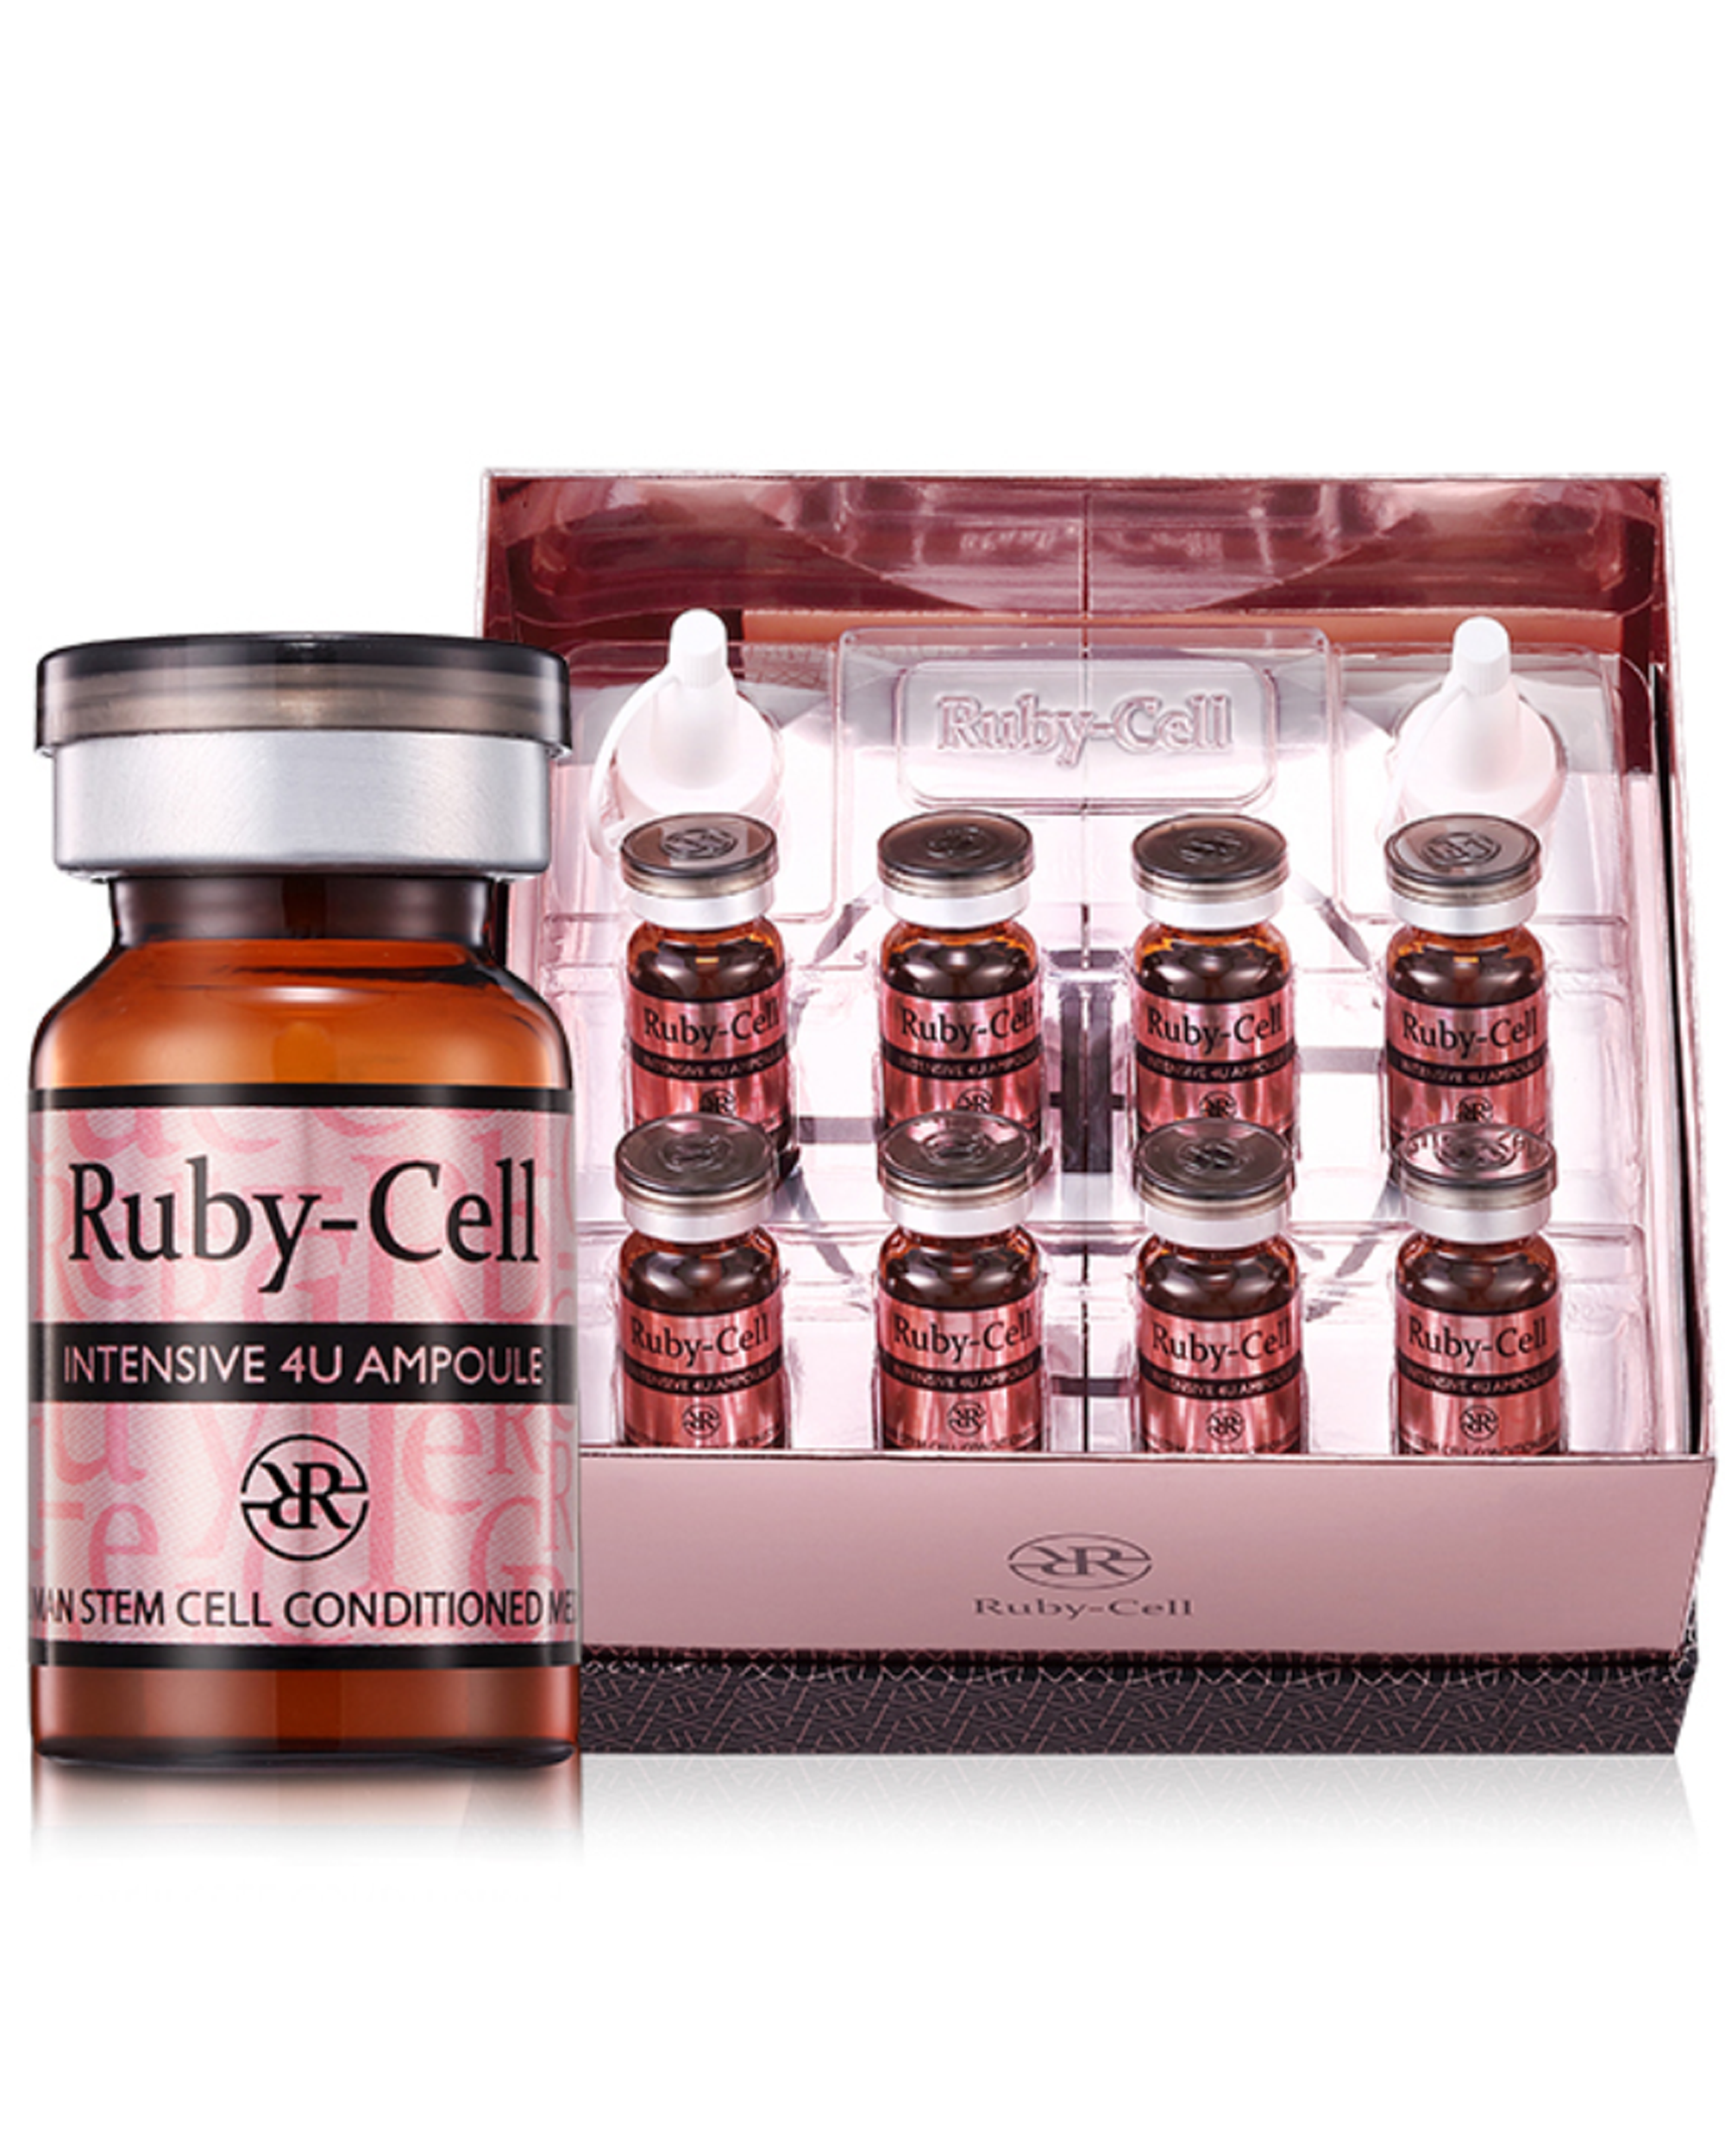 Ruby-Cell Intensive 4U Ampoule